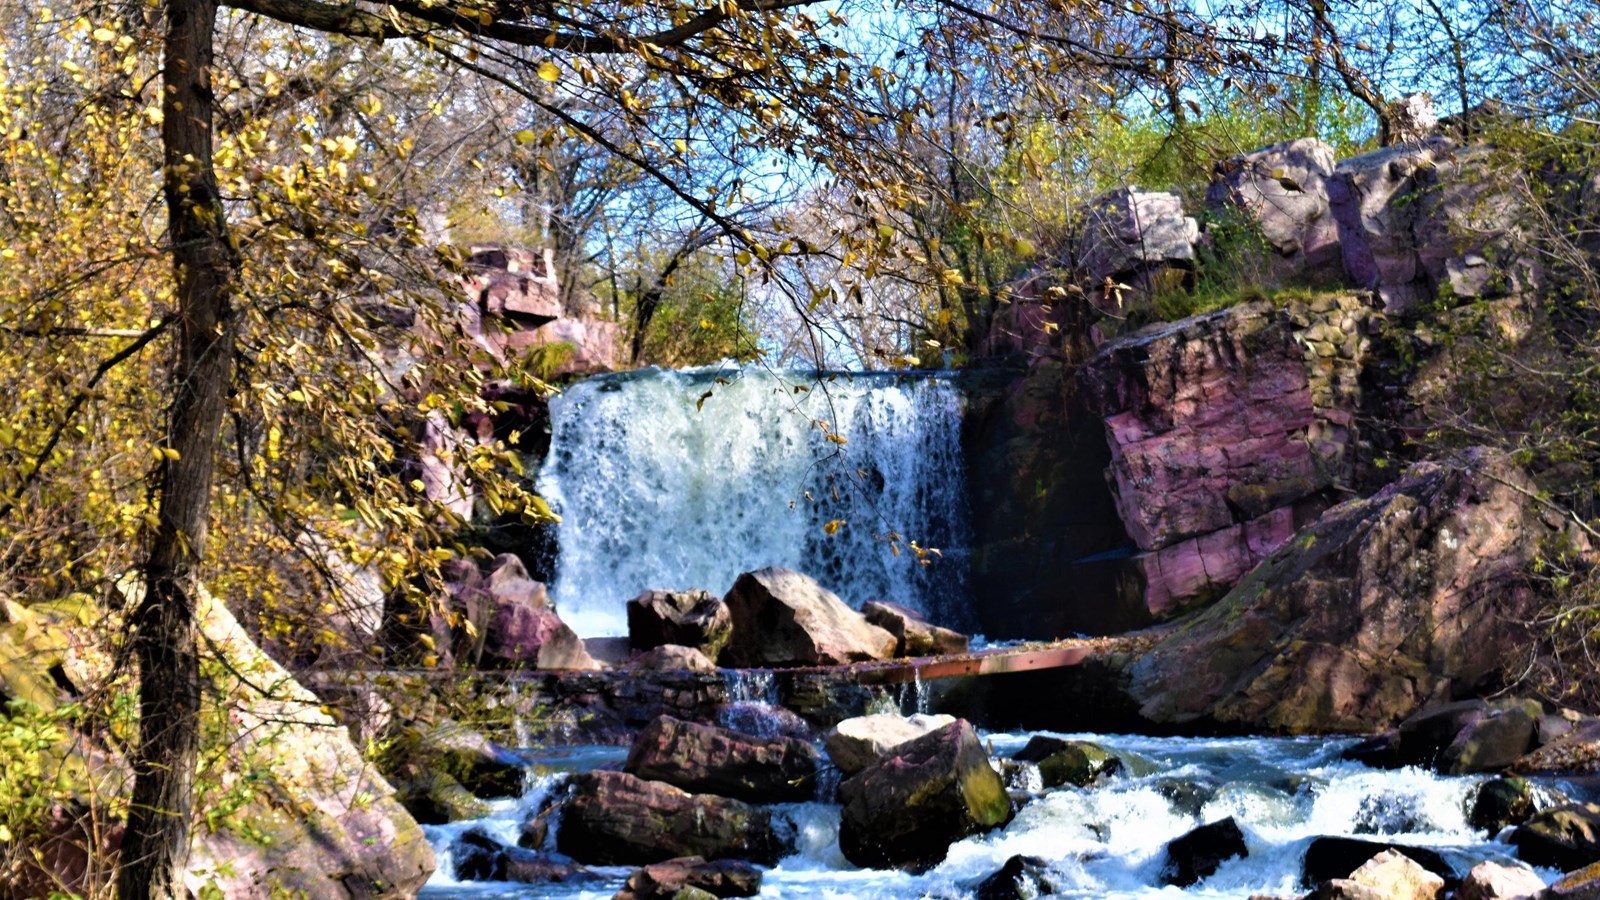 A waterfall surrounded by pink rocks and fall foliage.